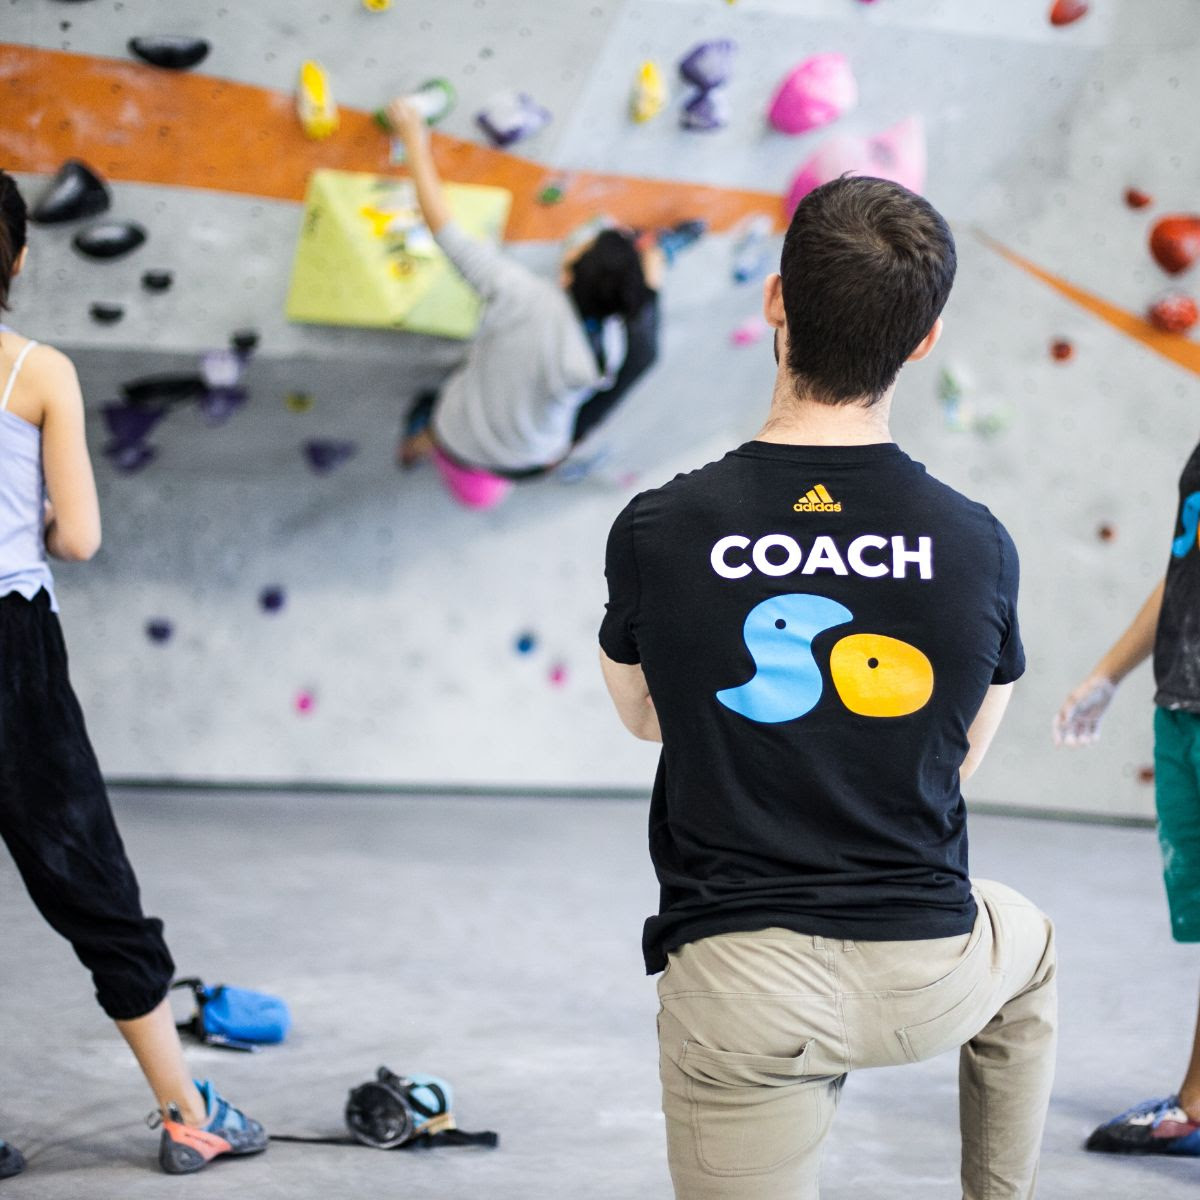 Two kids bouldering on a colorful climbing wall.